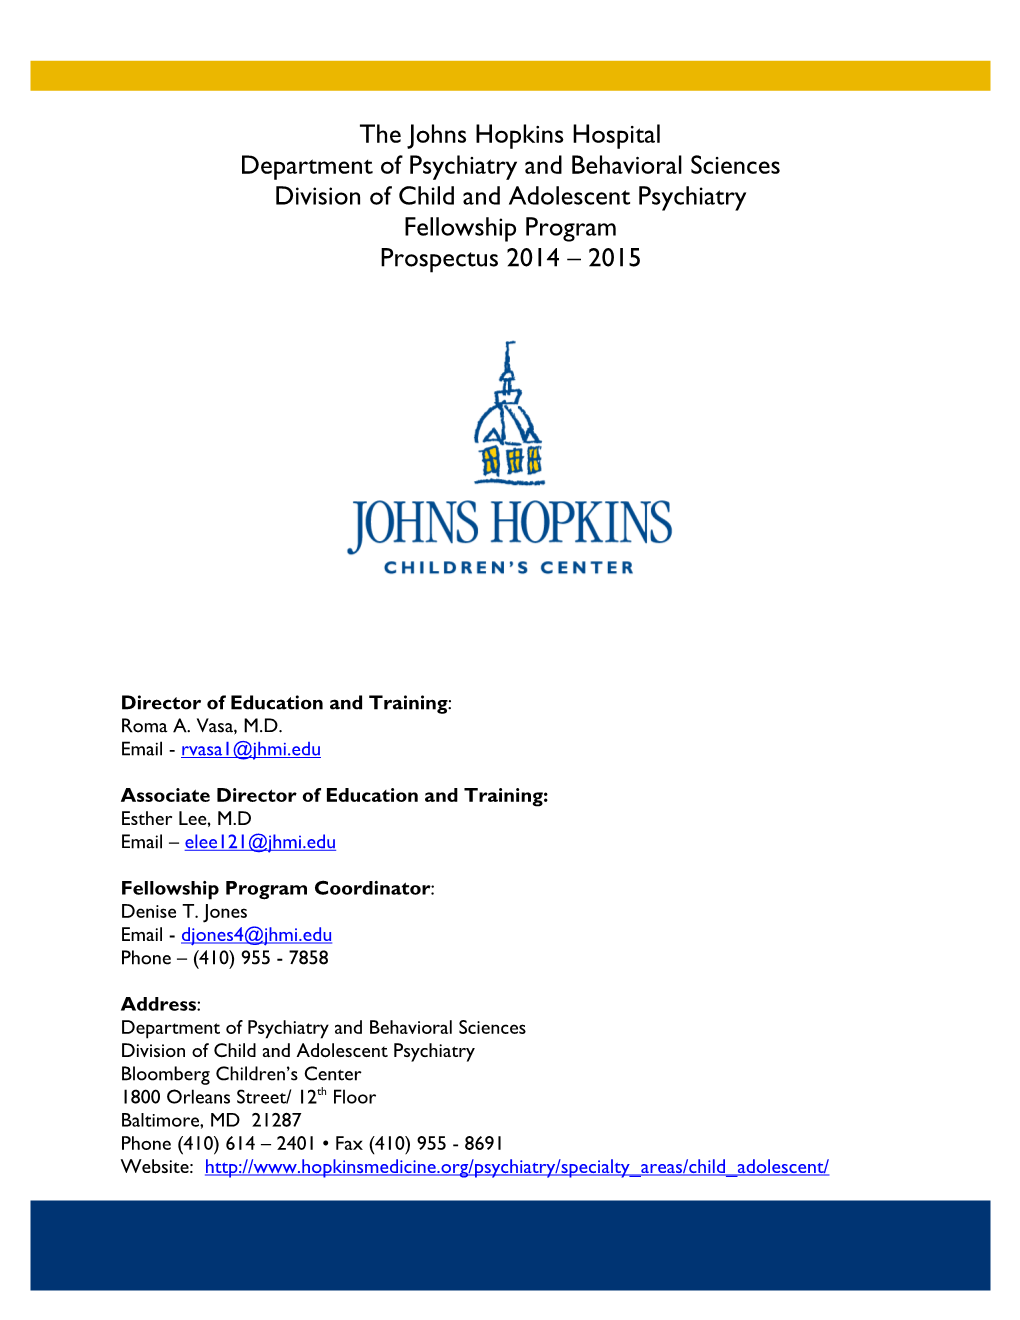 Founding of Child and Adolescent Psychiatry at Hopkins